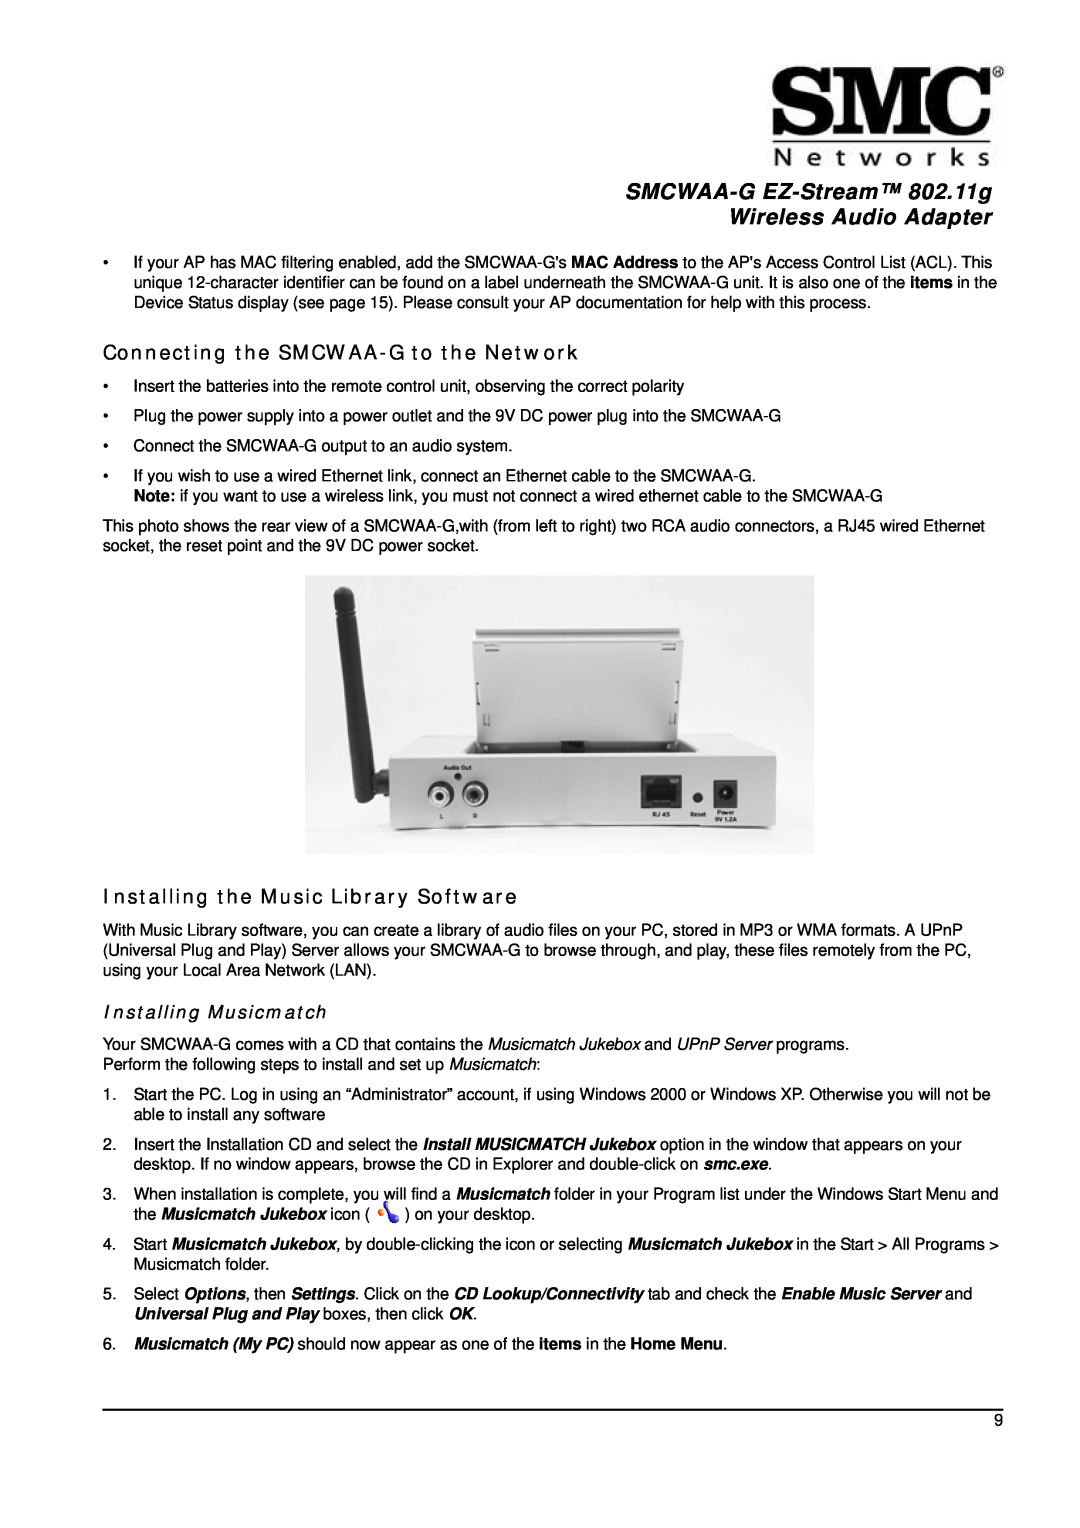 SMC Networks manual SMCWAA-G EZ-Stream 802.11g Wireless Audio Adapter, Connecting the SMCWAA-G to the Network 